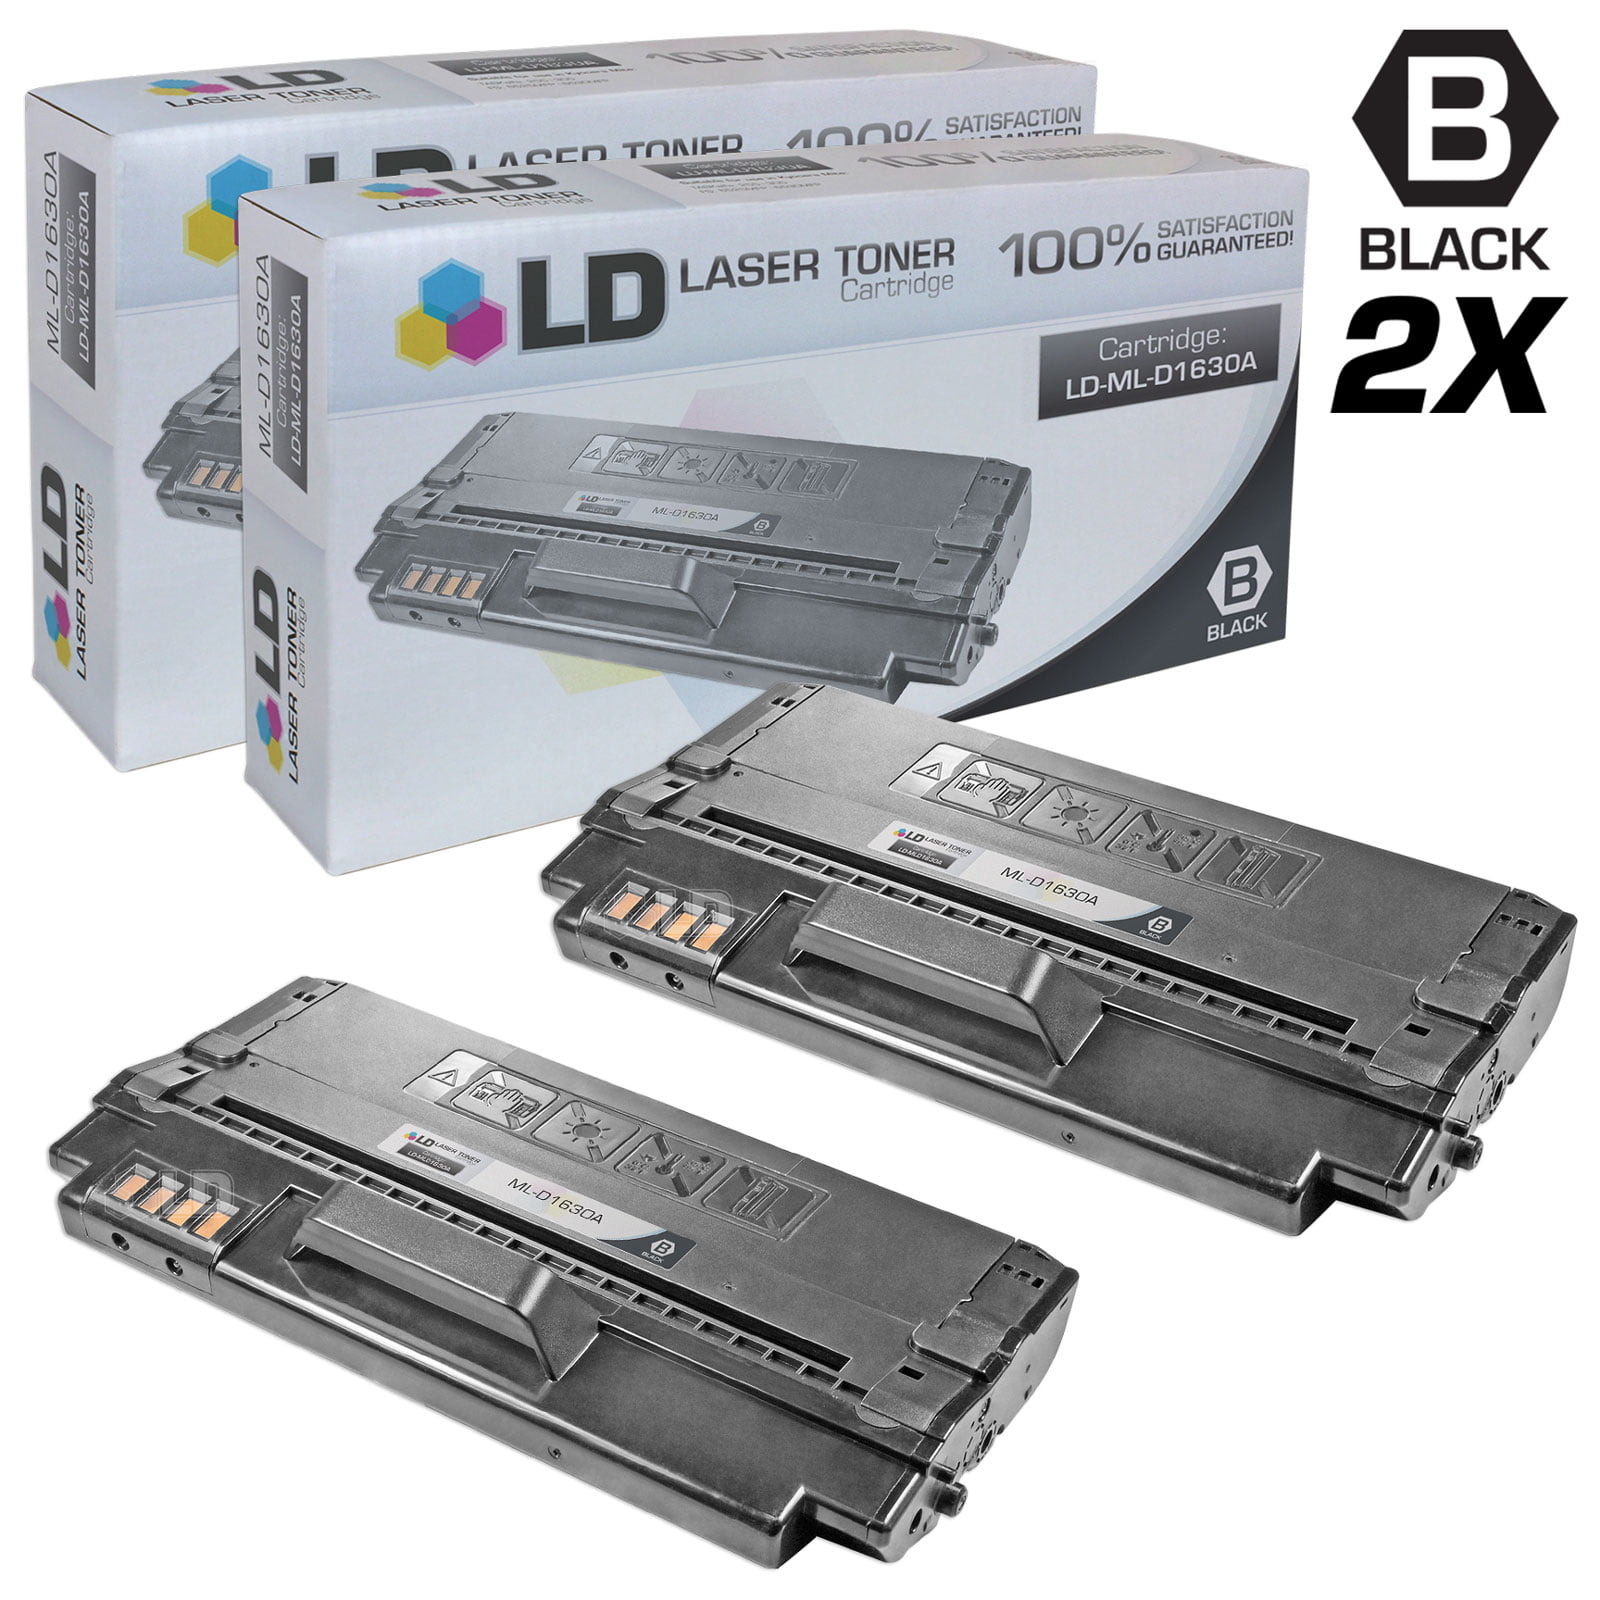 LD Compatible Replacements for Samsung ML-D1630A Set of High Yield Black Laser Toner Cartridges for use in Samsung ML-1630, ML-1630W, SCX-4500, and SCX-4500W s -